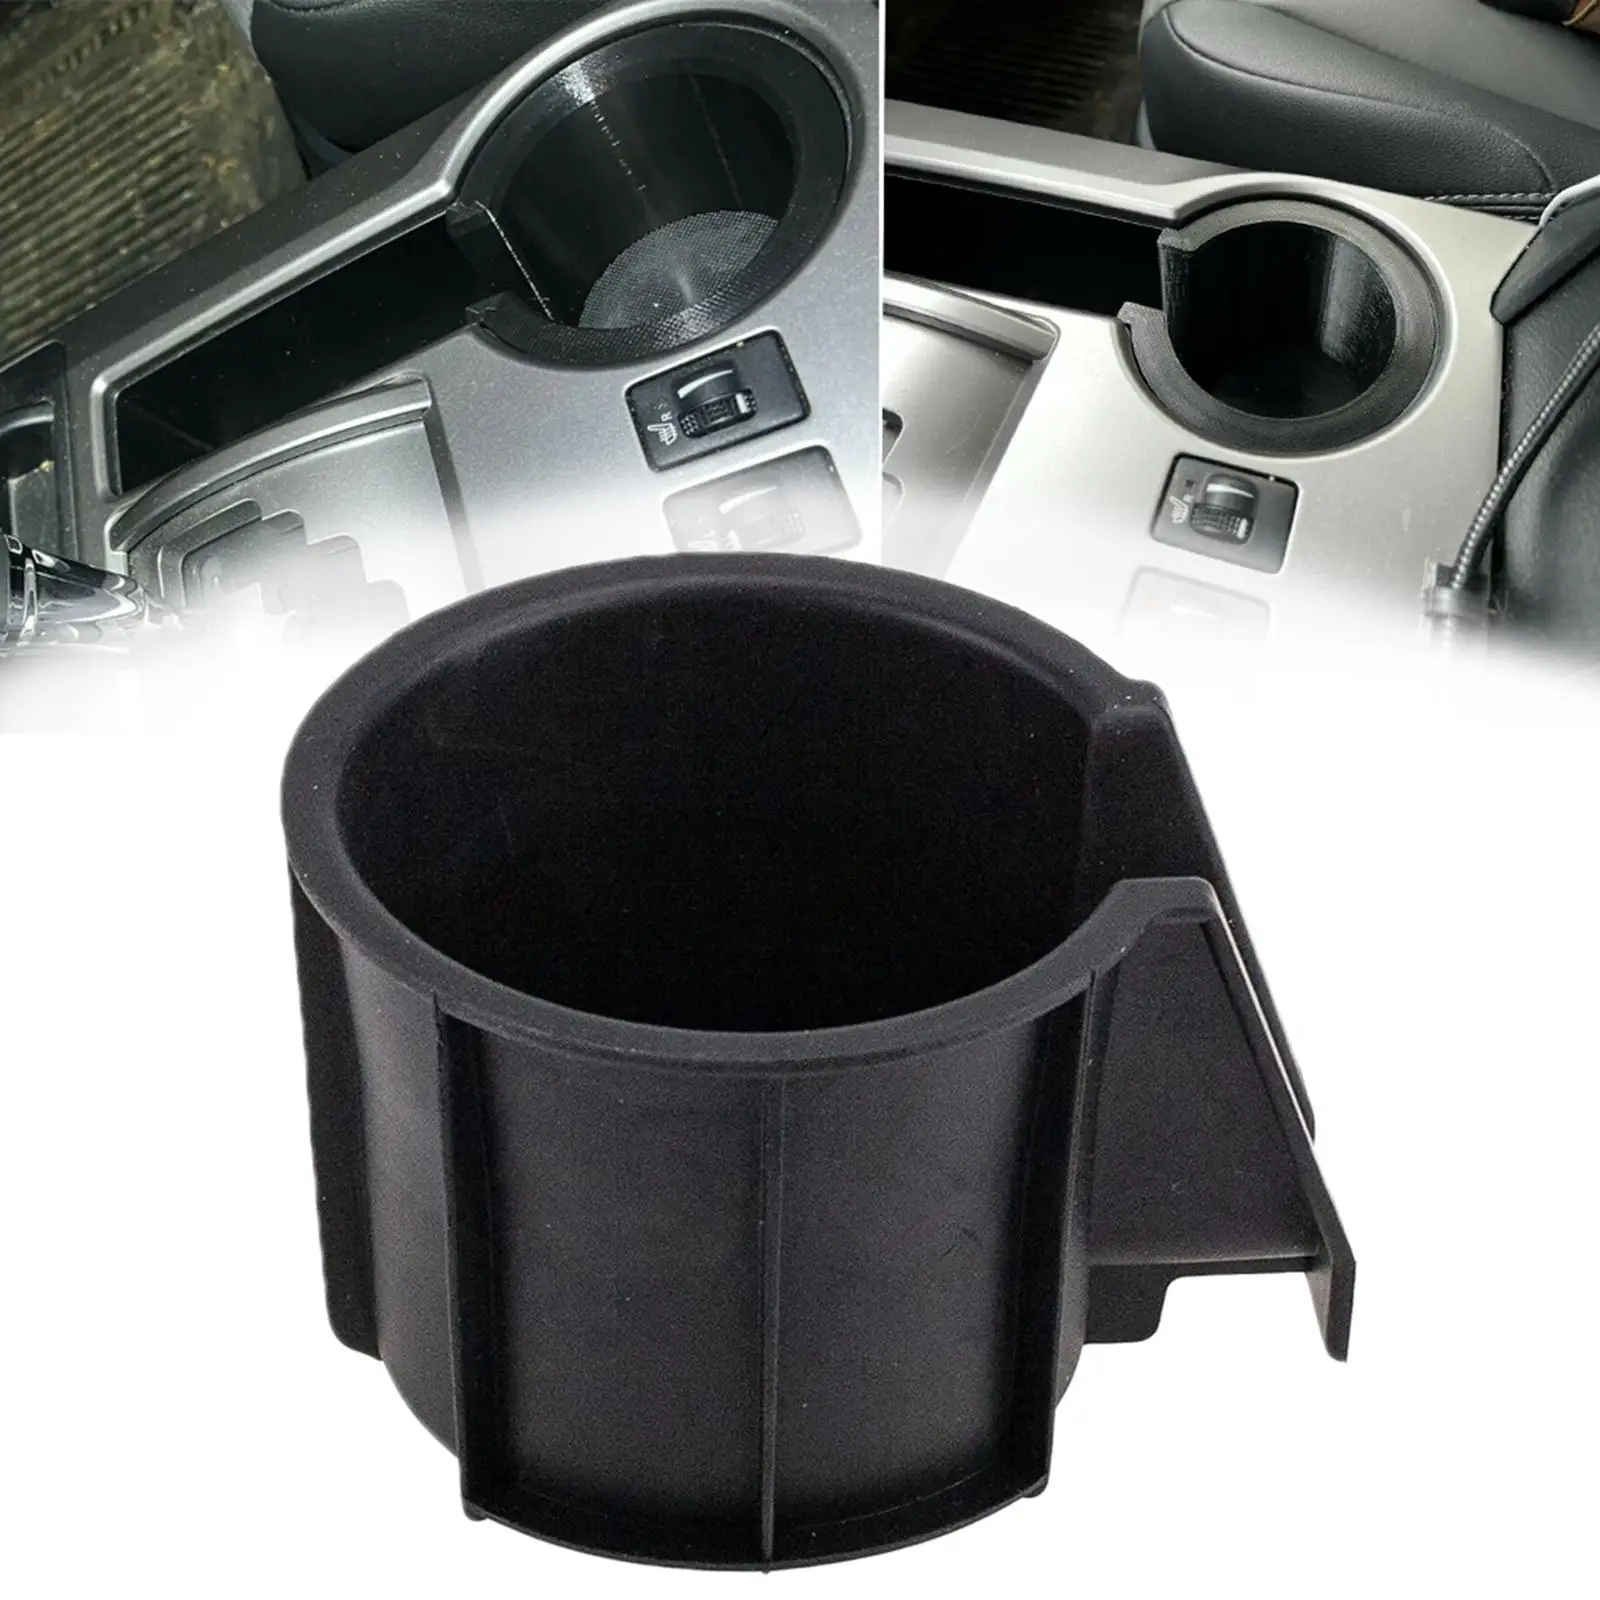 Cup Holder sub Assembly Rubber Replacement Portable Premium Practical Spare Parts Console Cup Holder Insert for 66992-35030